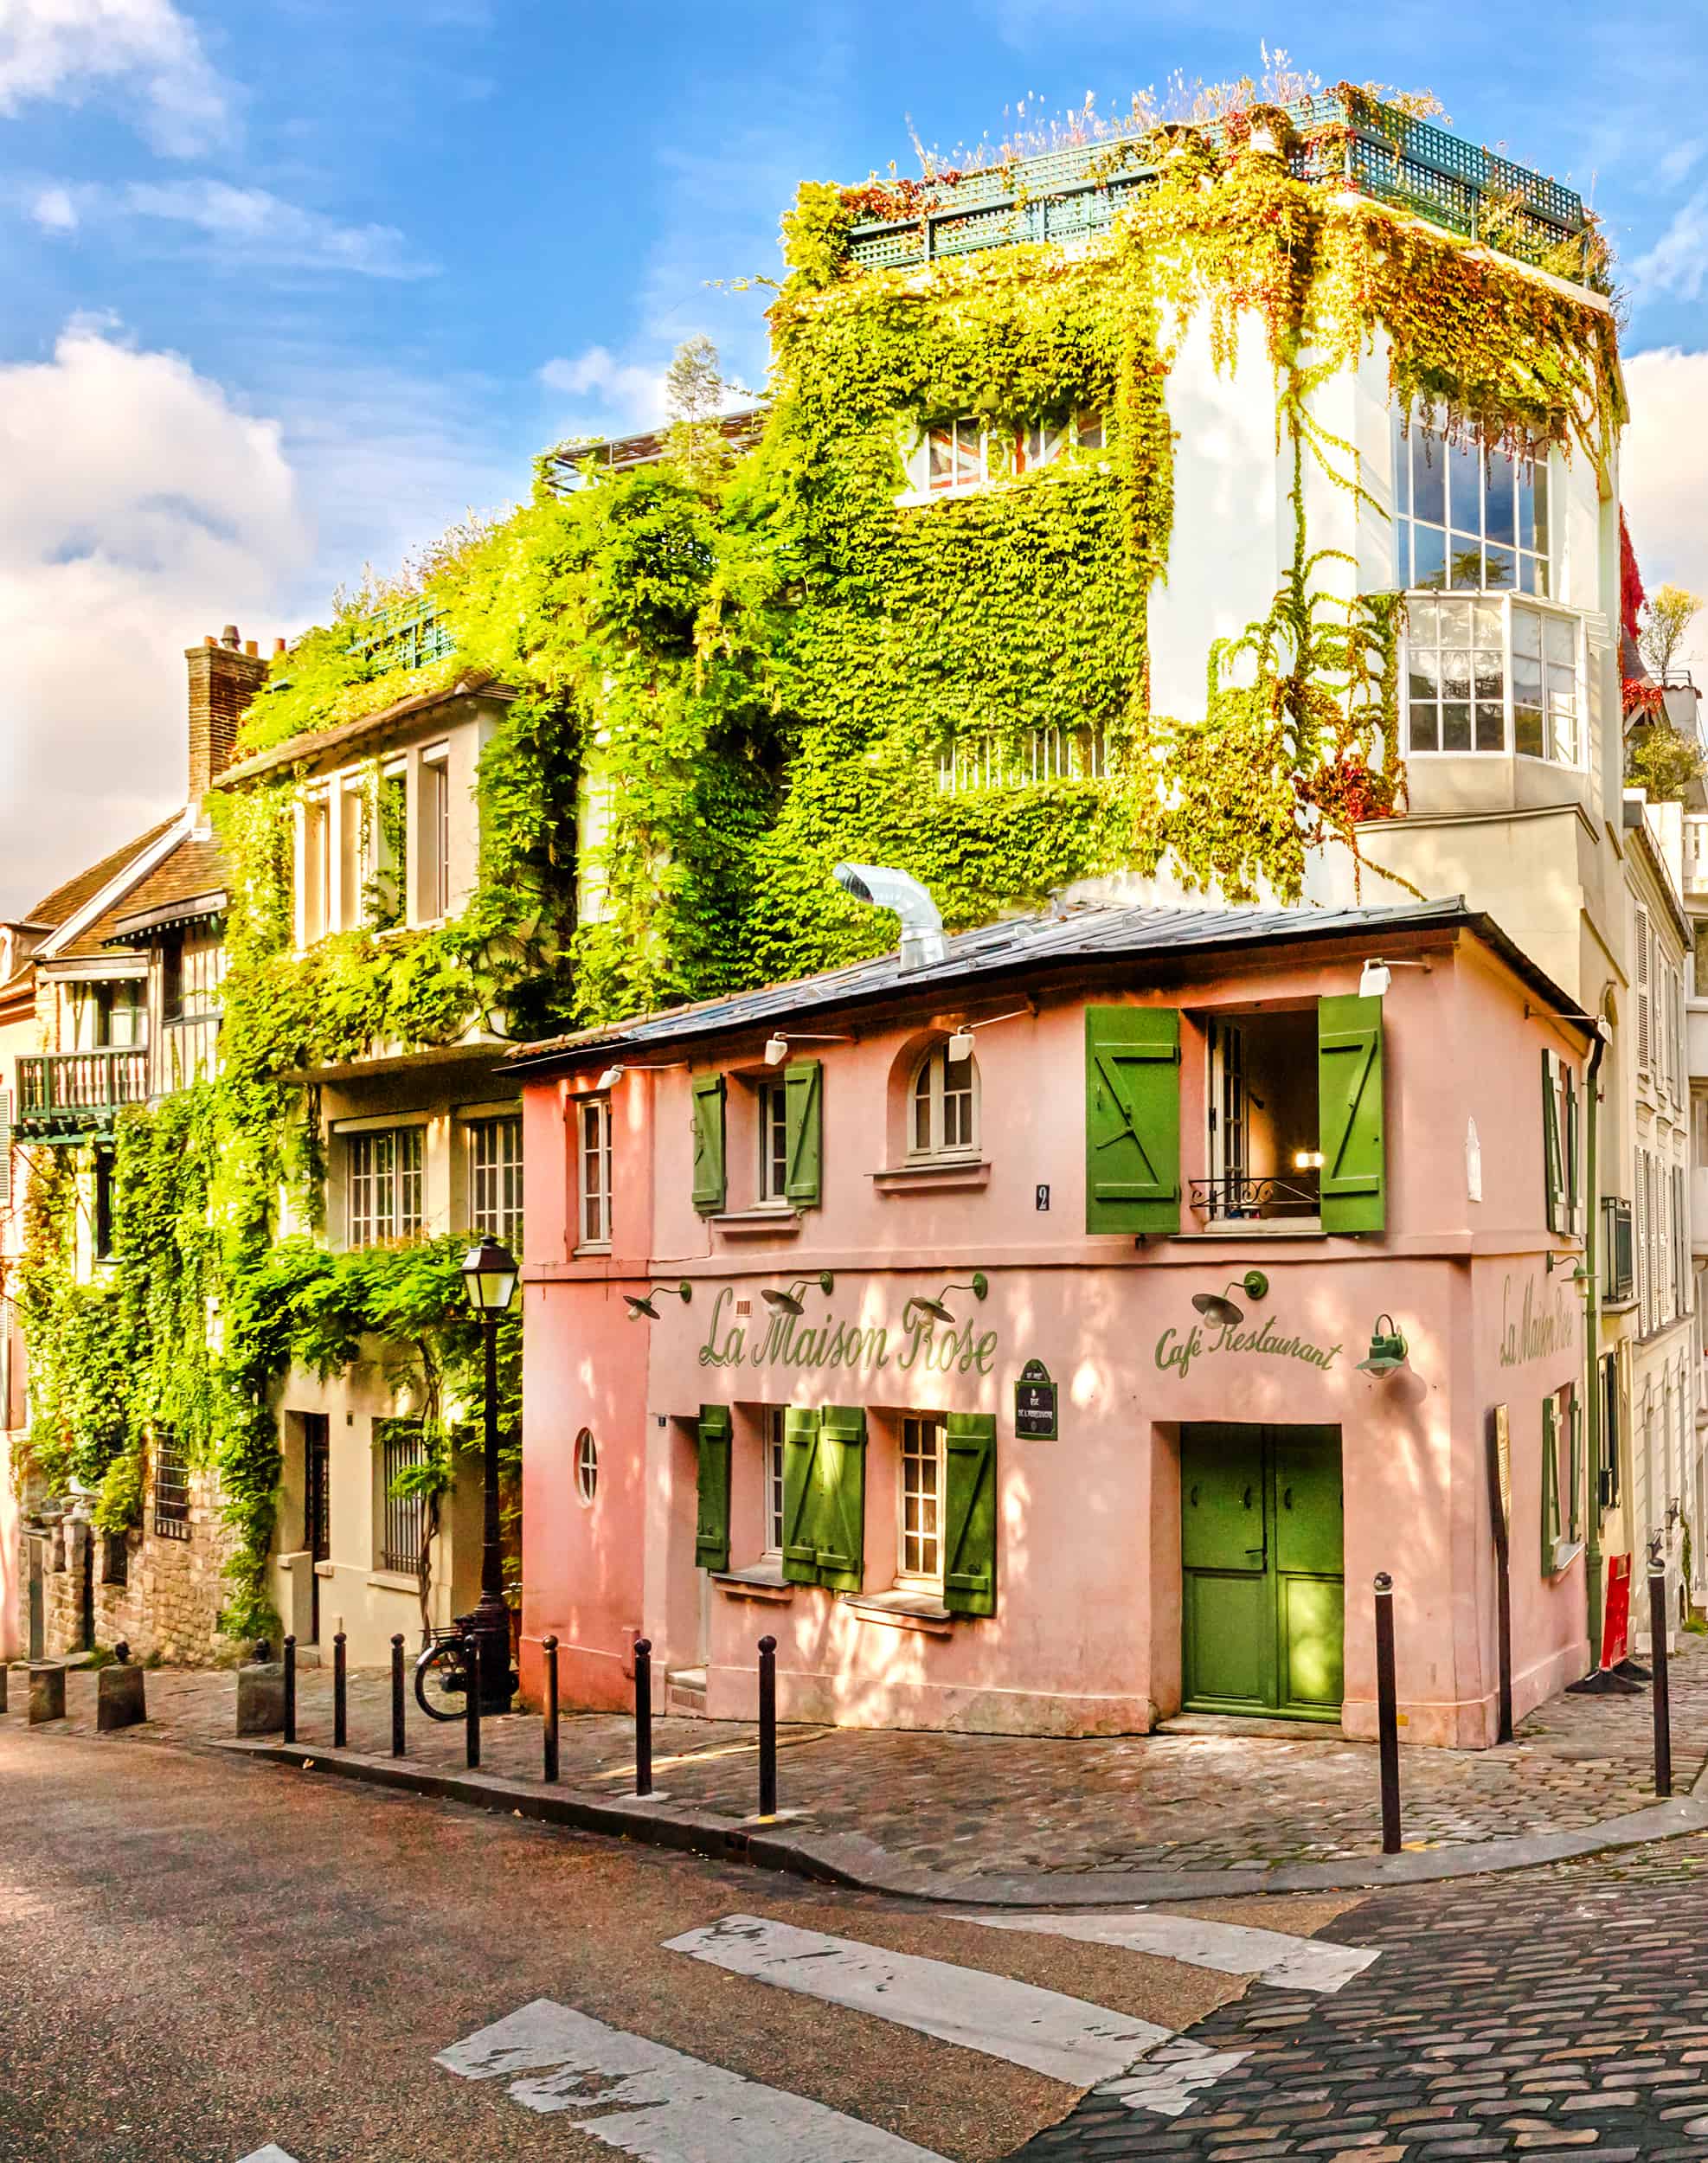 cute pink building in Paris | instagram locations in Paris | paris itinerary stops | things to do and see in Paris